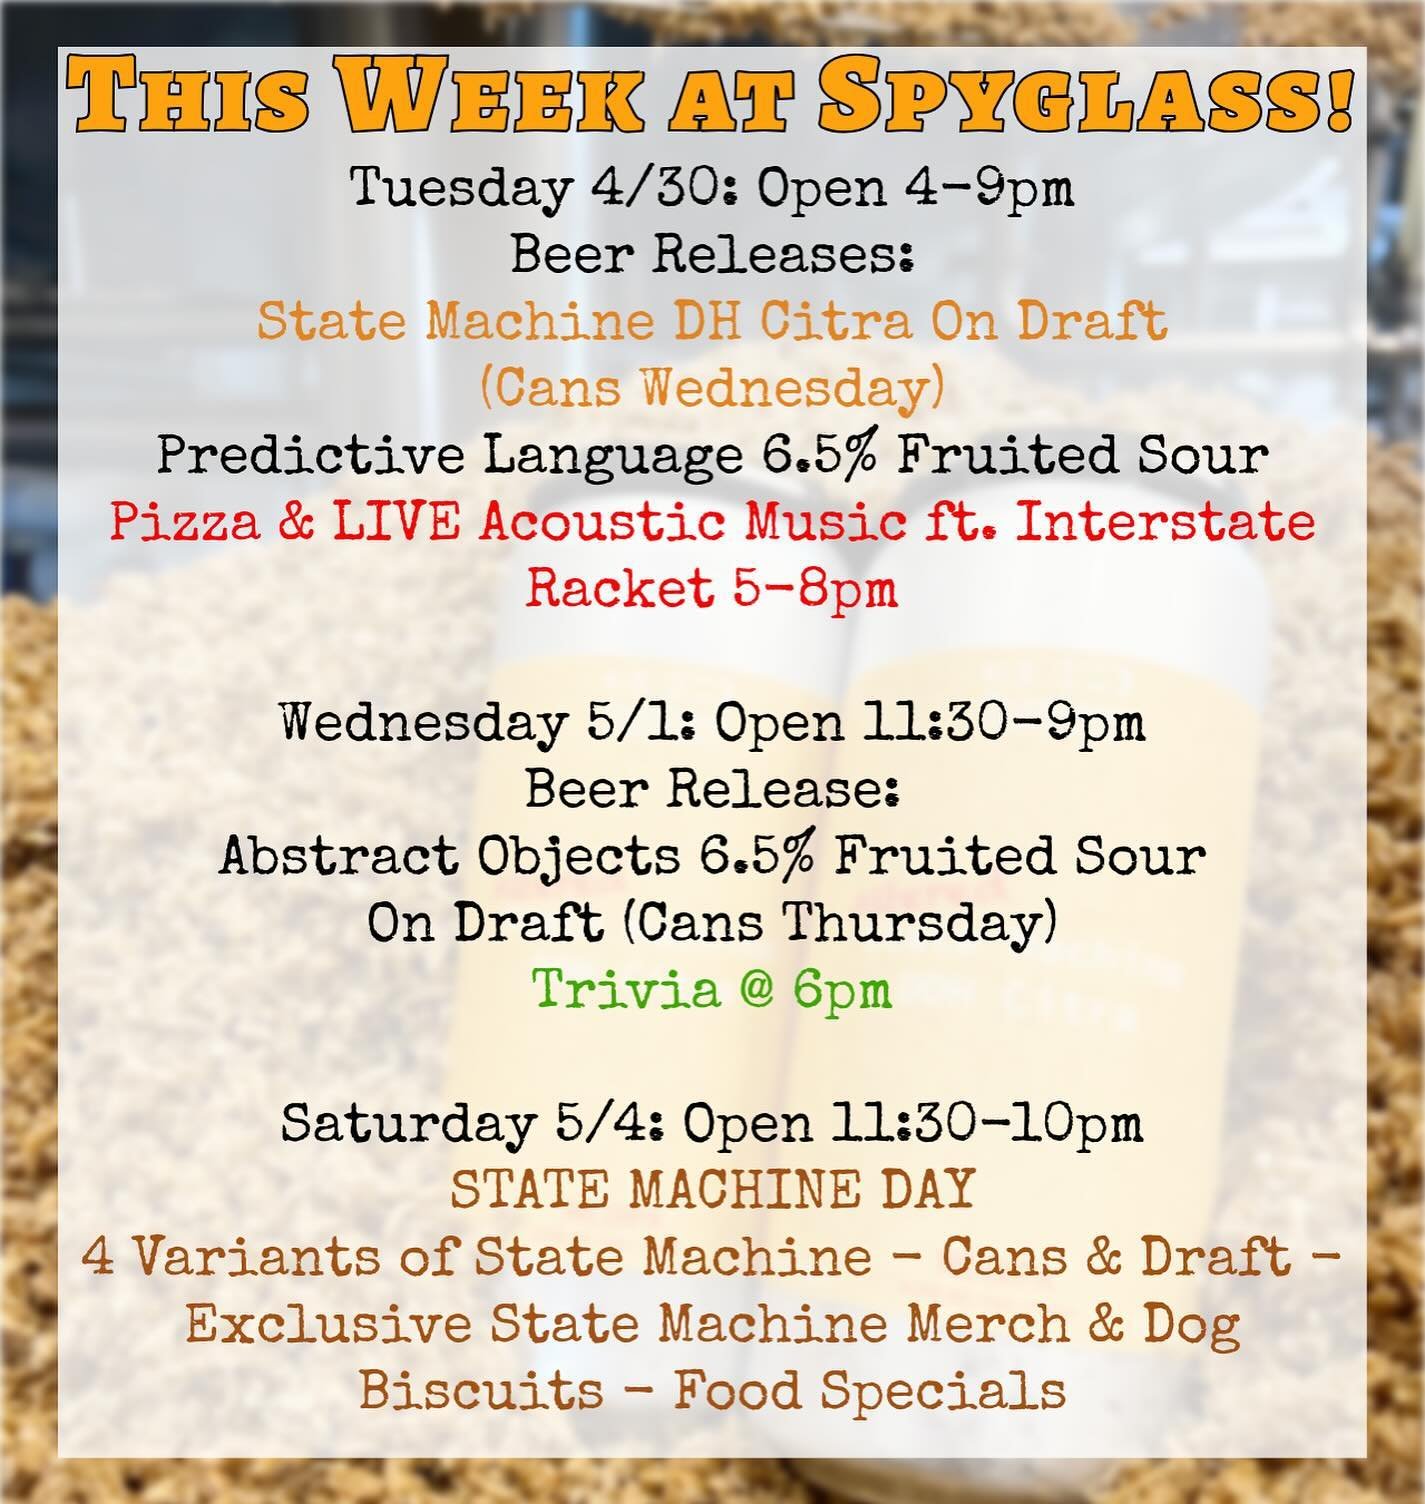 This Week at Spyglass!

Tuesday 4/30 Open 4-9pm 
🍕Chef Special Pizza - Shrimp Scampi Pizza with baby shrimp, garlic, butter, herbs, and lemon.

🎸 Pair your Pizza with LIVE MUSIC ft. Interstate Racket 5-8pm!

Wednesday 5/1 Open 11:30-9pm
Trivia @ 6p